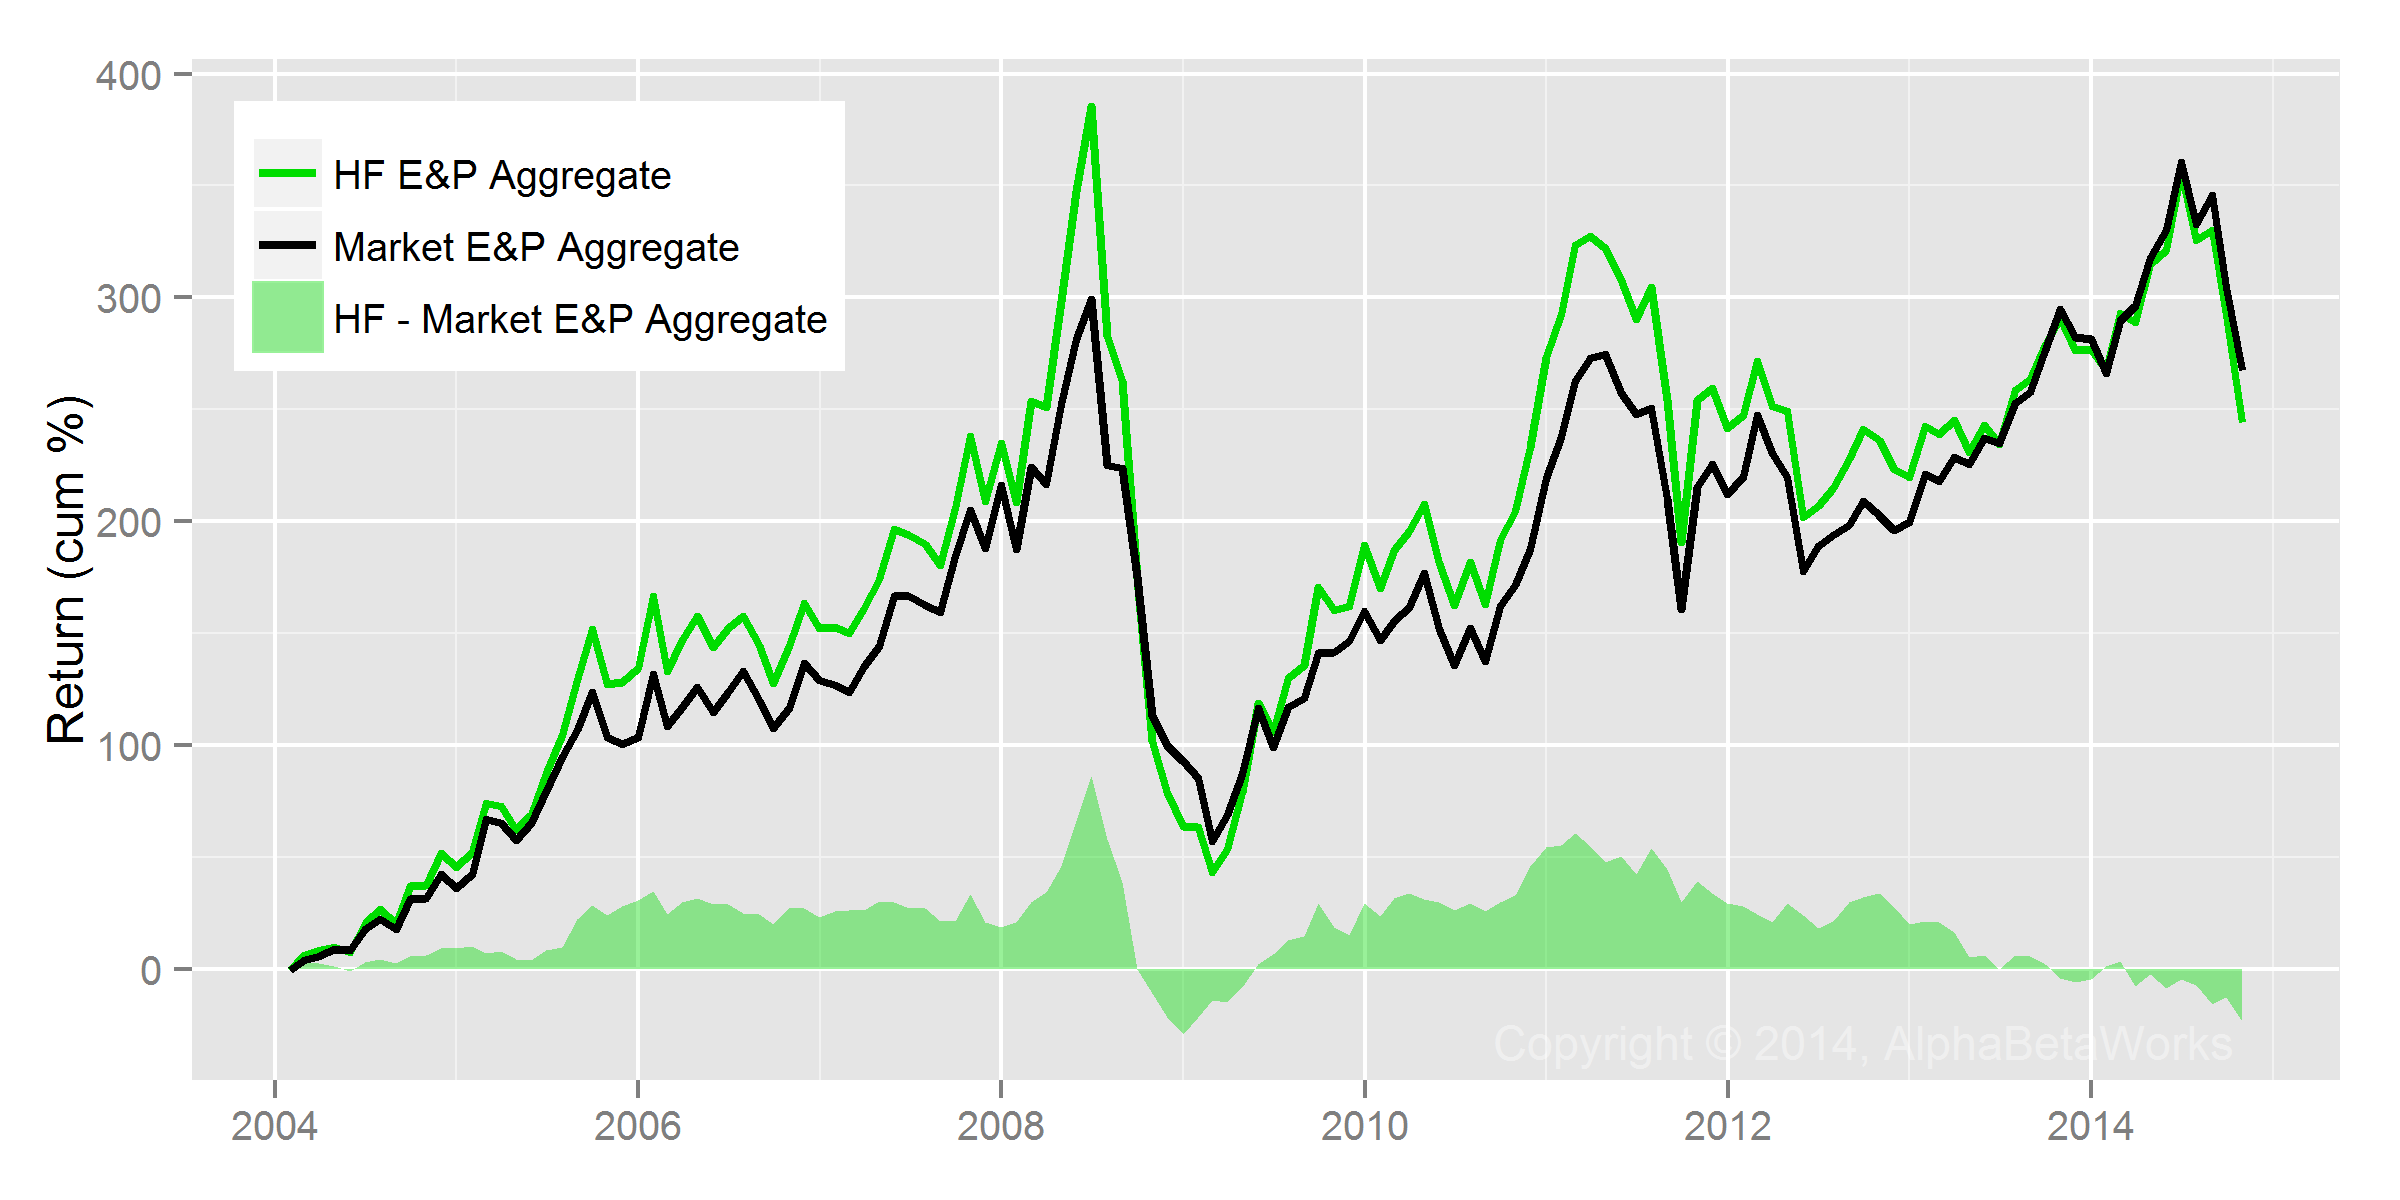 Chart of the historical returns of Hedge Fund Exporation and Production (E&P) Aggregate and Market E&P Aggregate